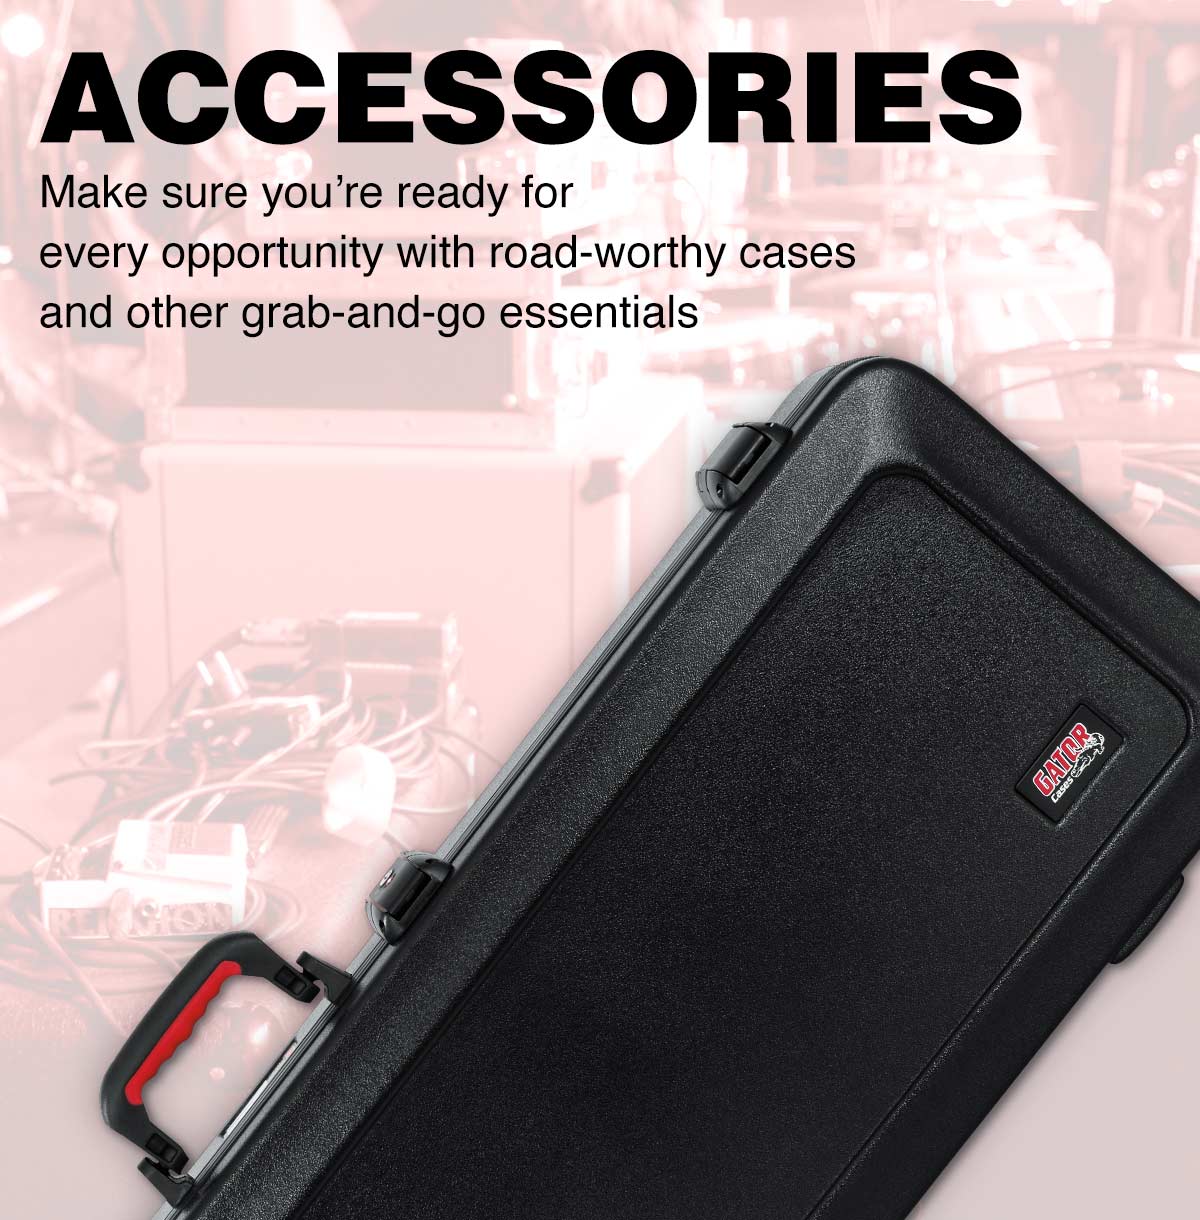 Accesories. Make sure you're ready for every opportunity with road-worthy cases and other grab-and-go essentials